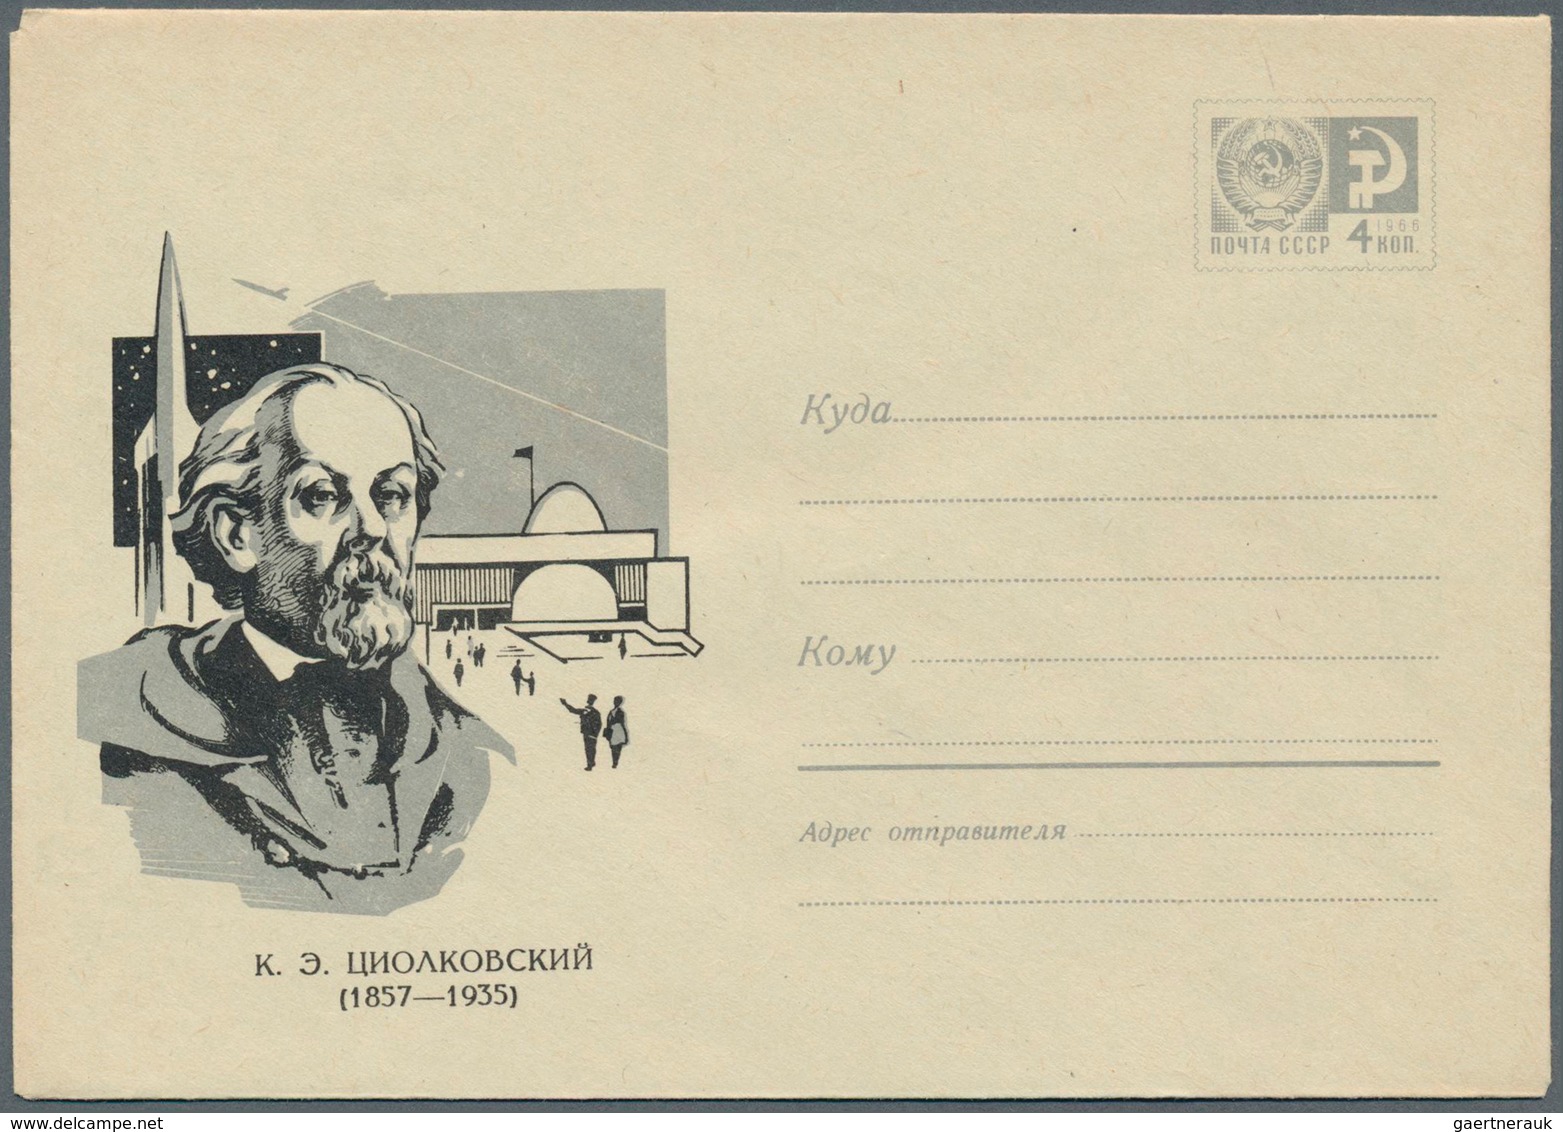 25452 Thematik: Raumfahrt / astronautics: 1953/1976, USSR. Lot of about 98 only different entire envelopes